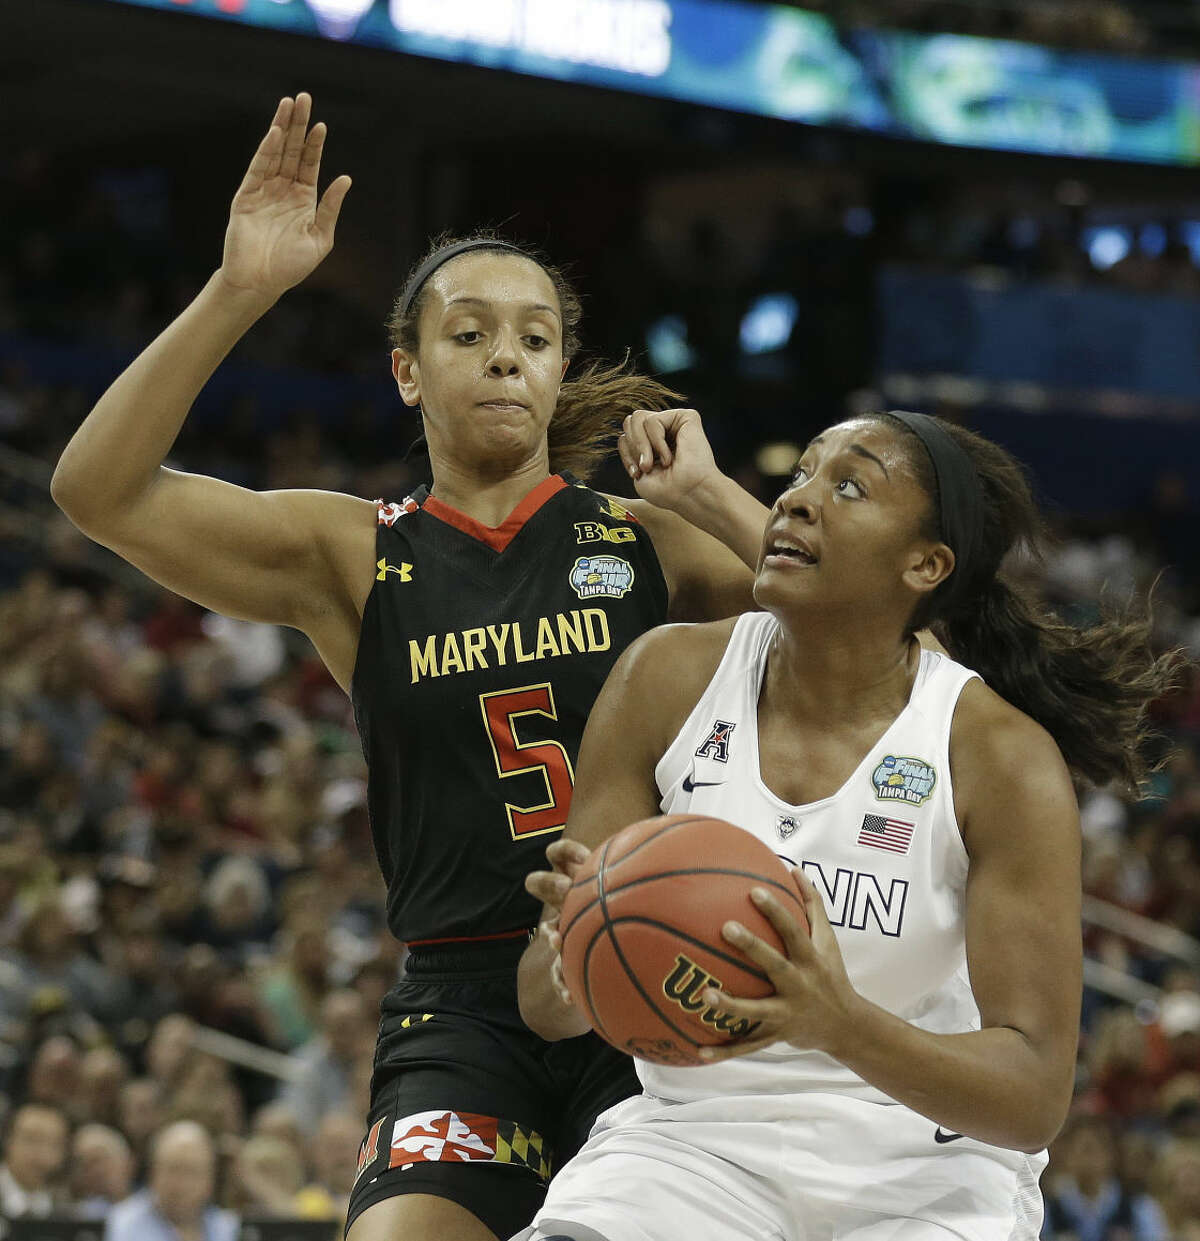 Connecticut forward Morgan Tuck (3) shoots against Maryland center Malina Howard (5) during the first half of the NCAA Women's Final Four tournament college basketball semifinal game, Sunday, April 5, 2015, in Tampa, Fla. (AP Photo/Brynn Anderson )